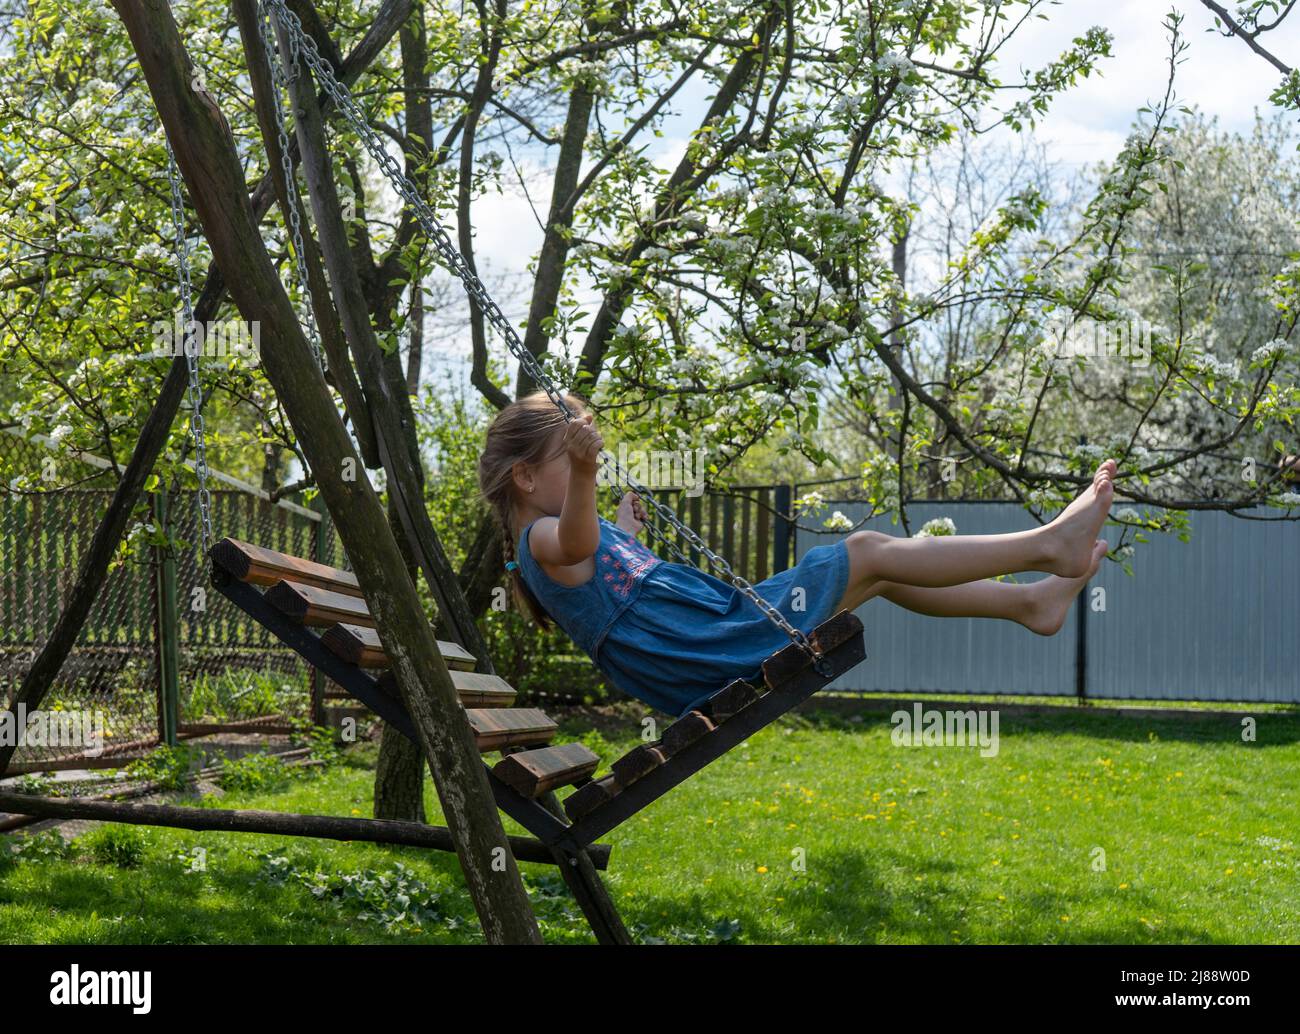 little girl barefoot rides on a swing on a sunny day Stock Photo